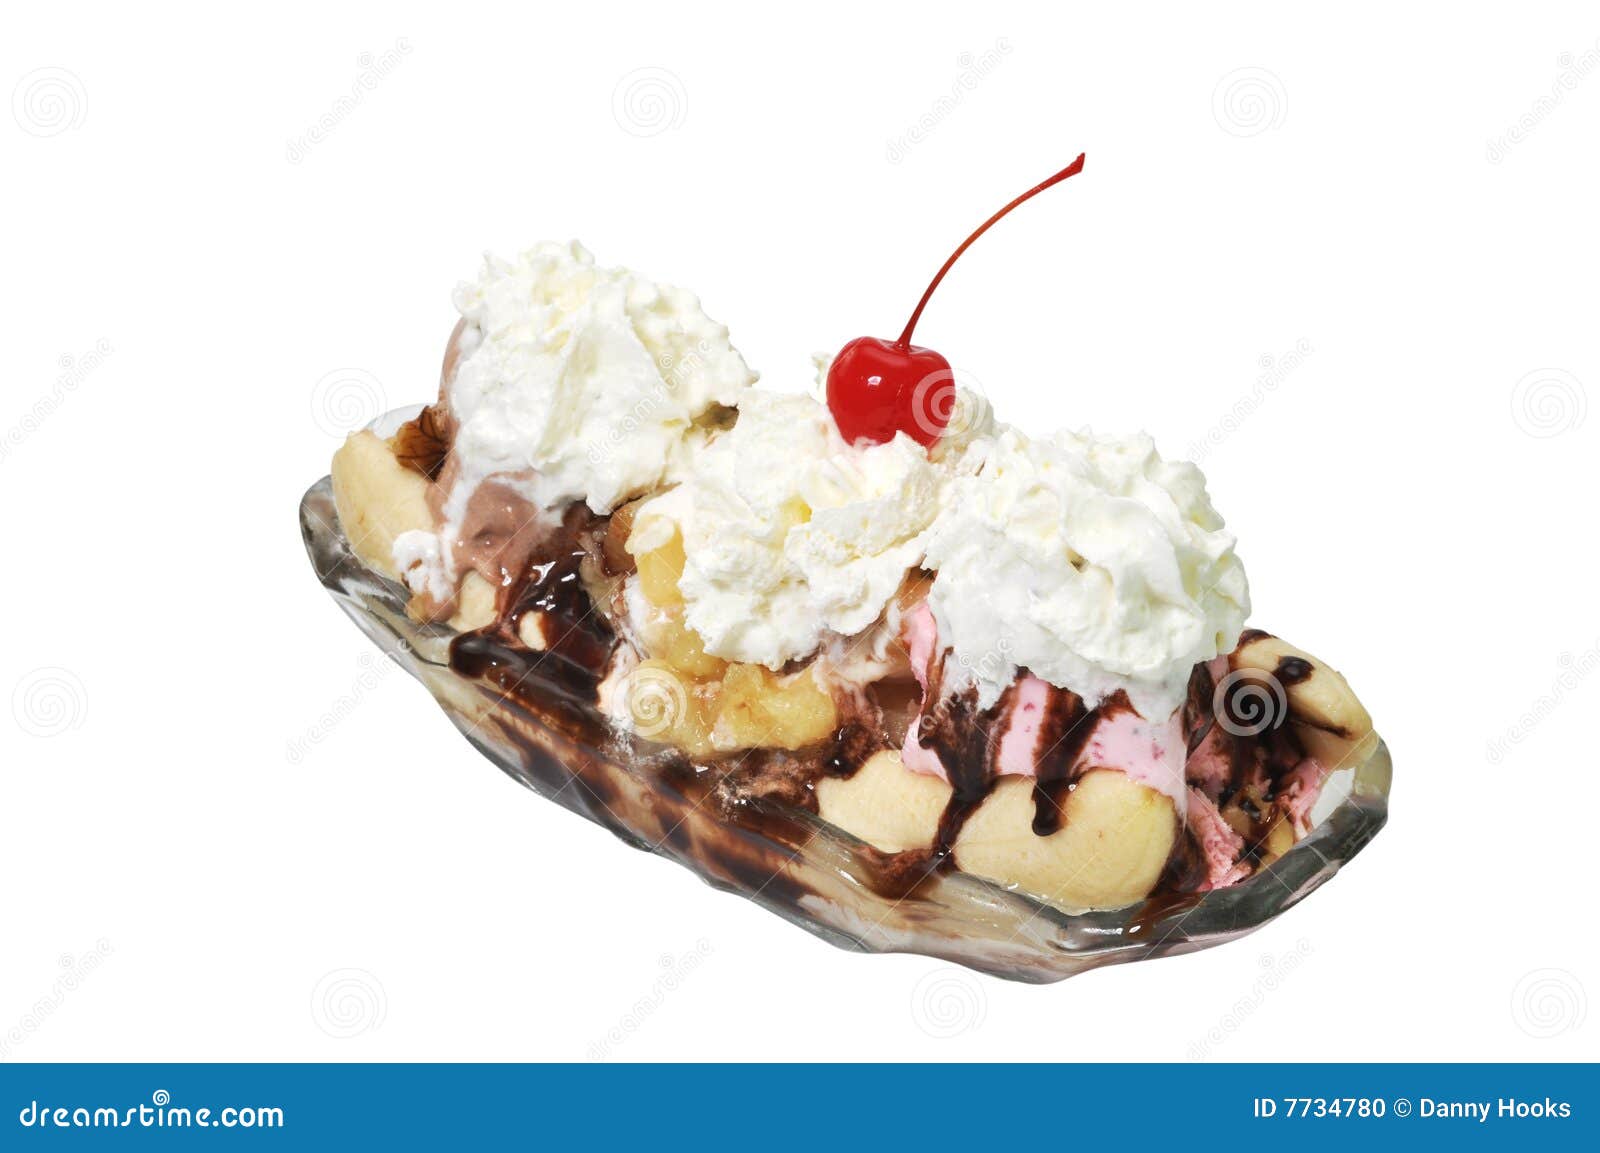 banana split with clipping path